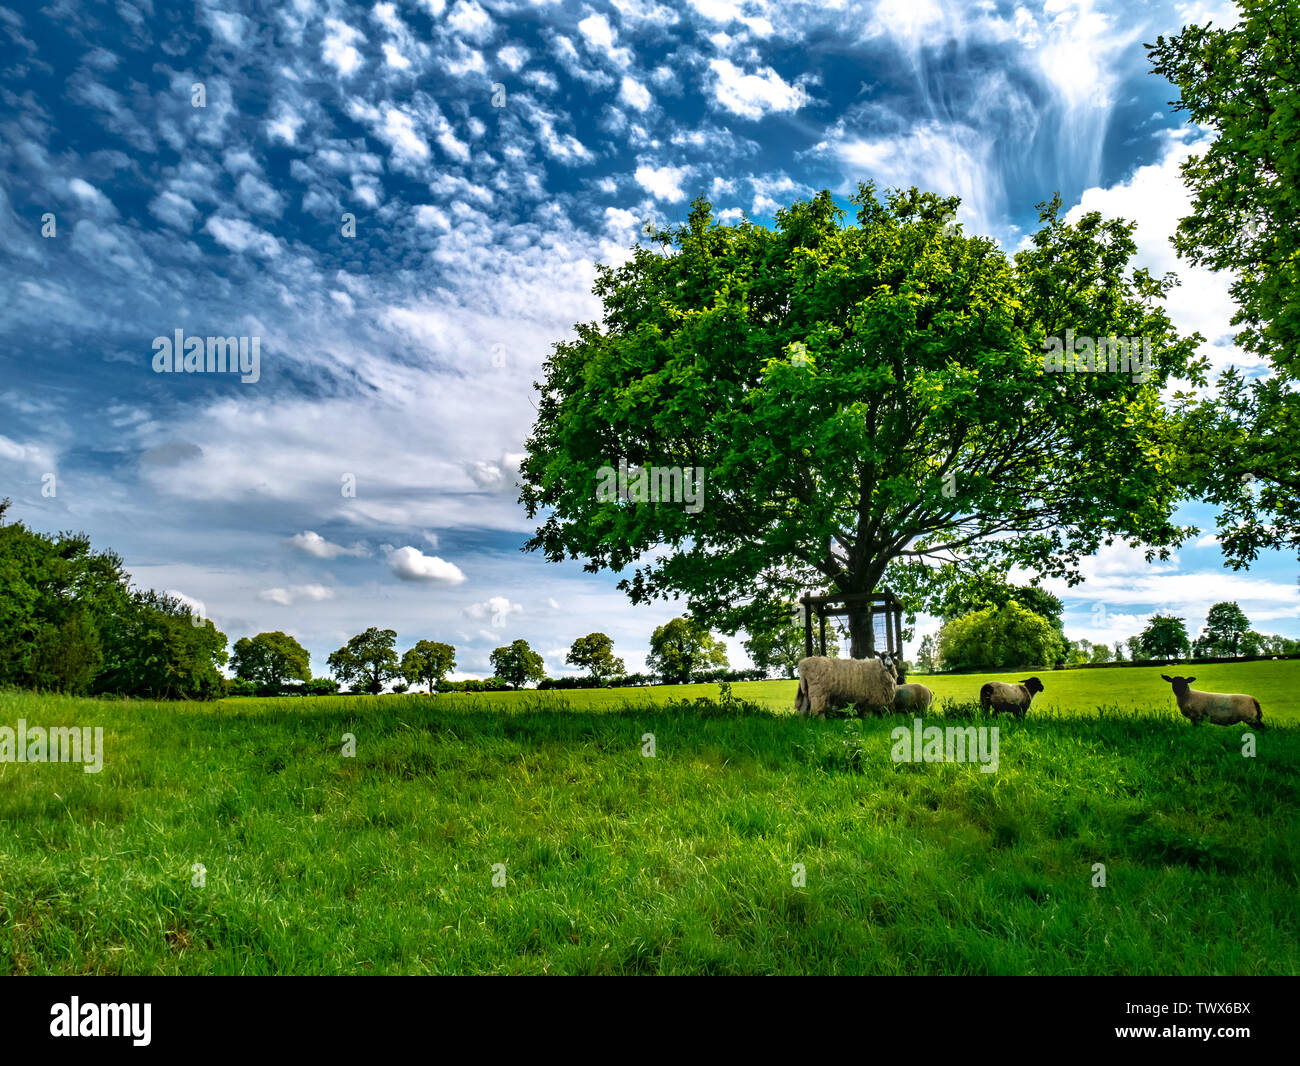 A typical British landscape, in the heart of the Cotswolds. Sheep graze on rich green grass underneath a blue sky with scattered clouds. Stock Photo